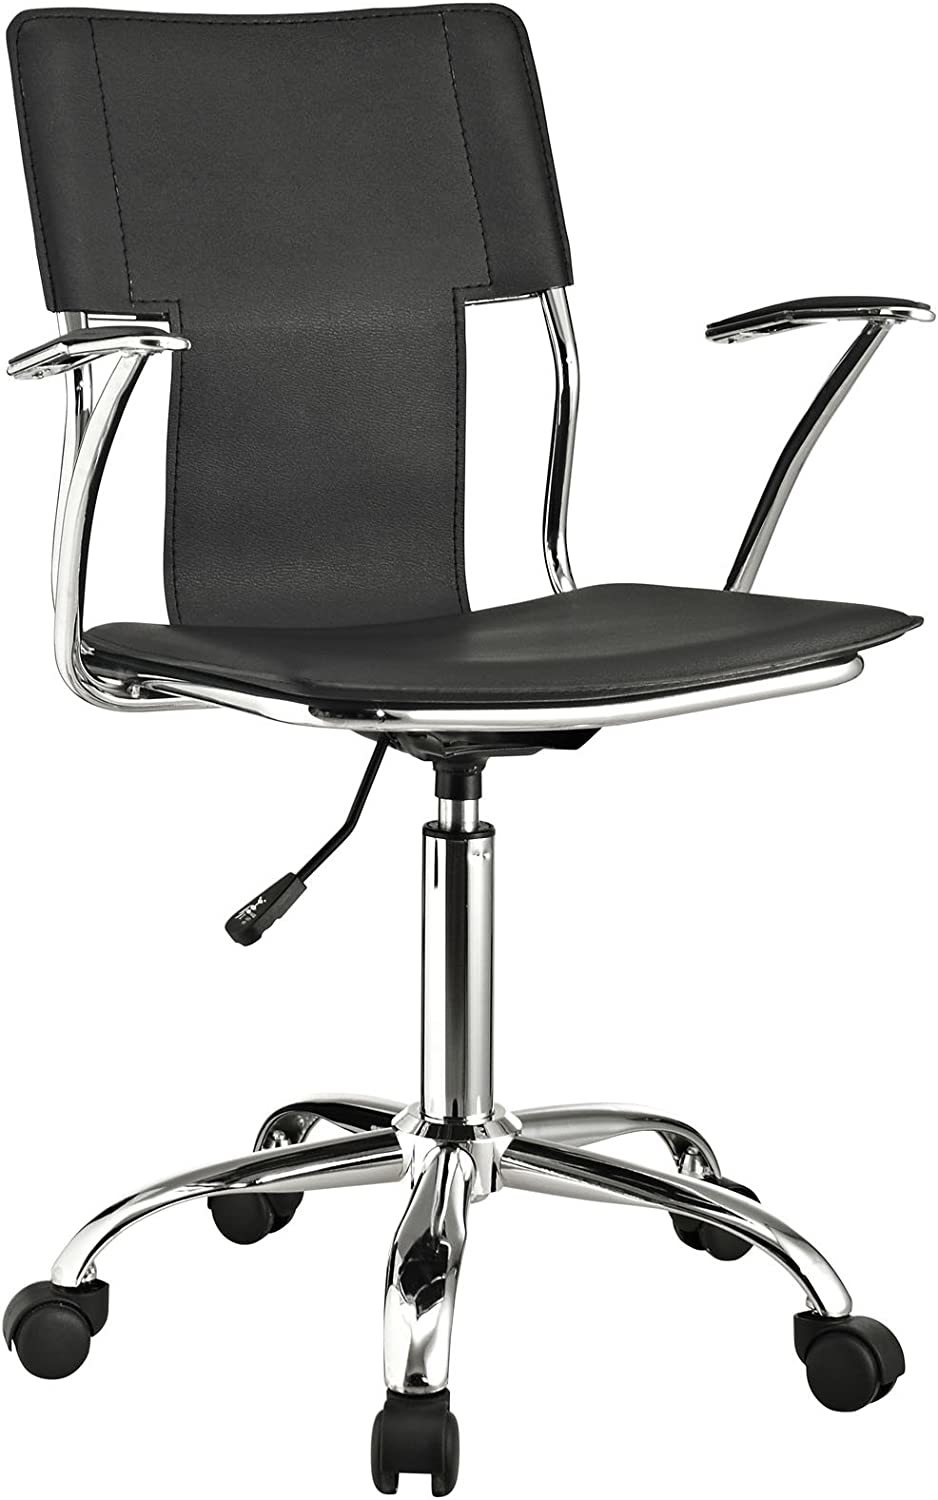 Primary image for Modway Studio Faux Leather Swivel Task Office Chair in Black